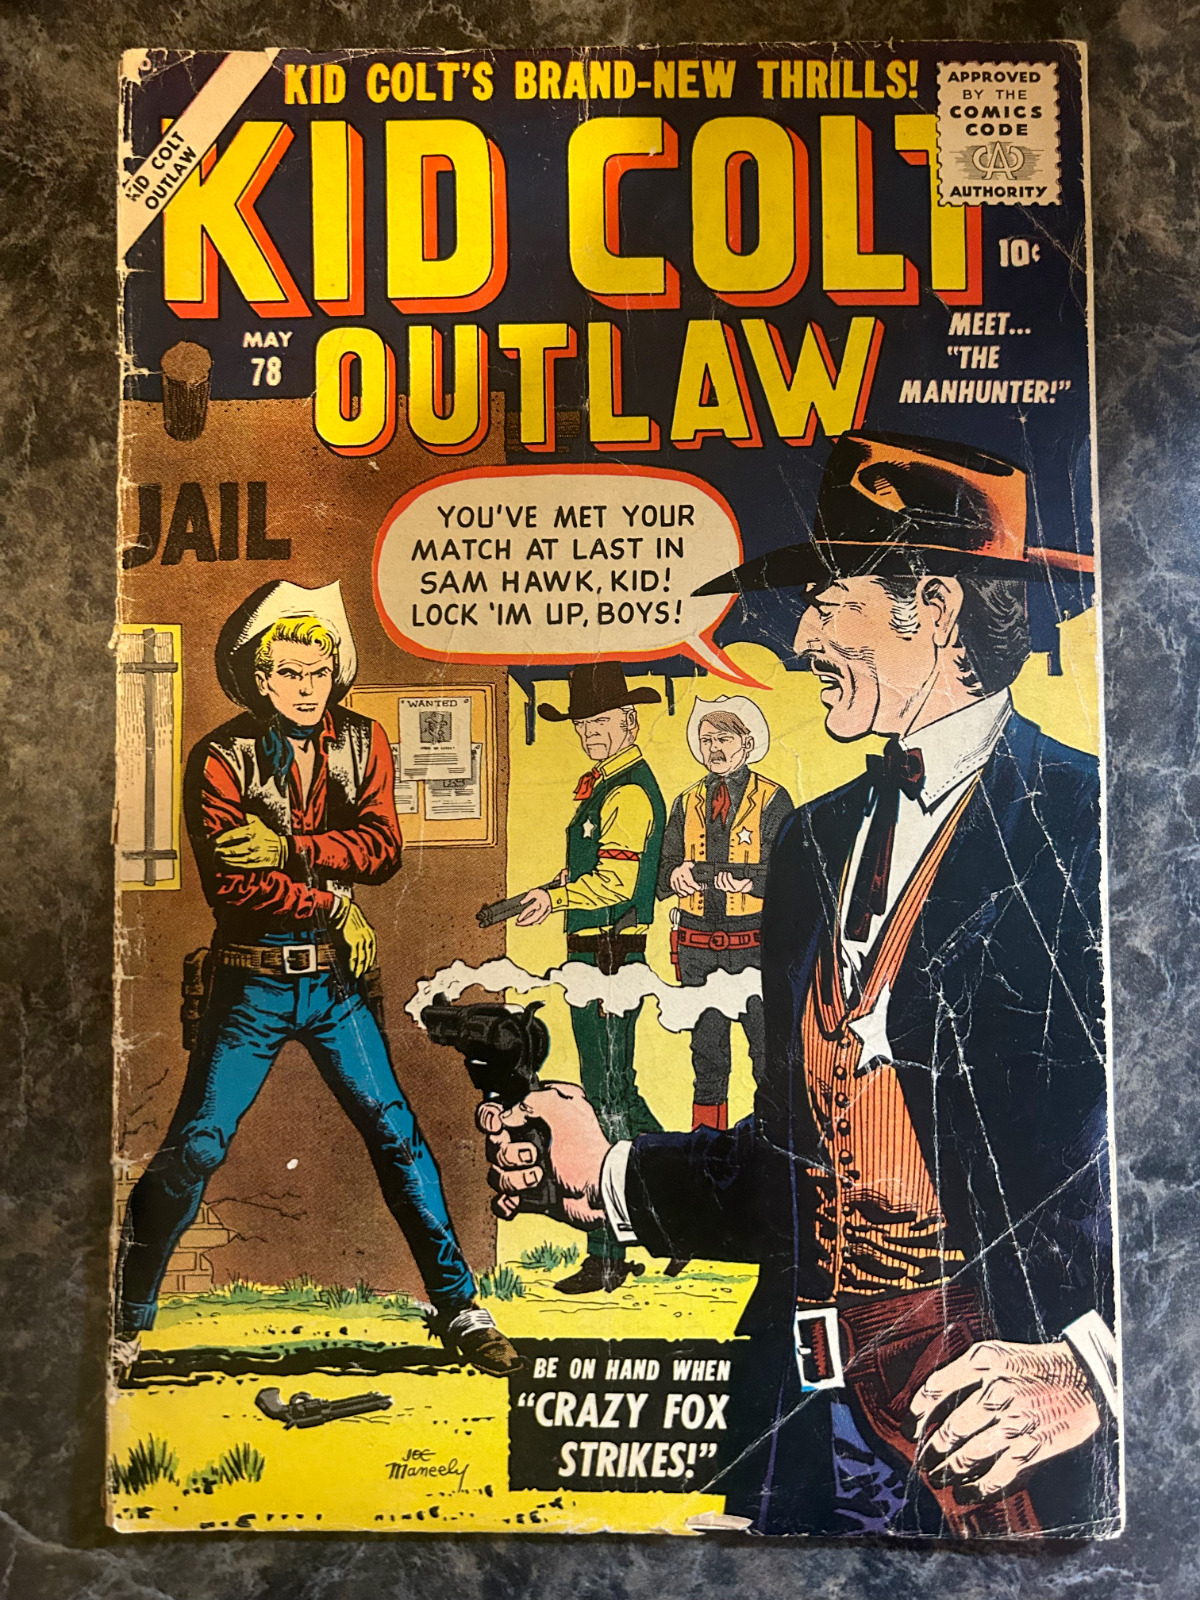 Kid Colt Outlaw Comic Book #78 May, 10 cents, Good Condition